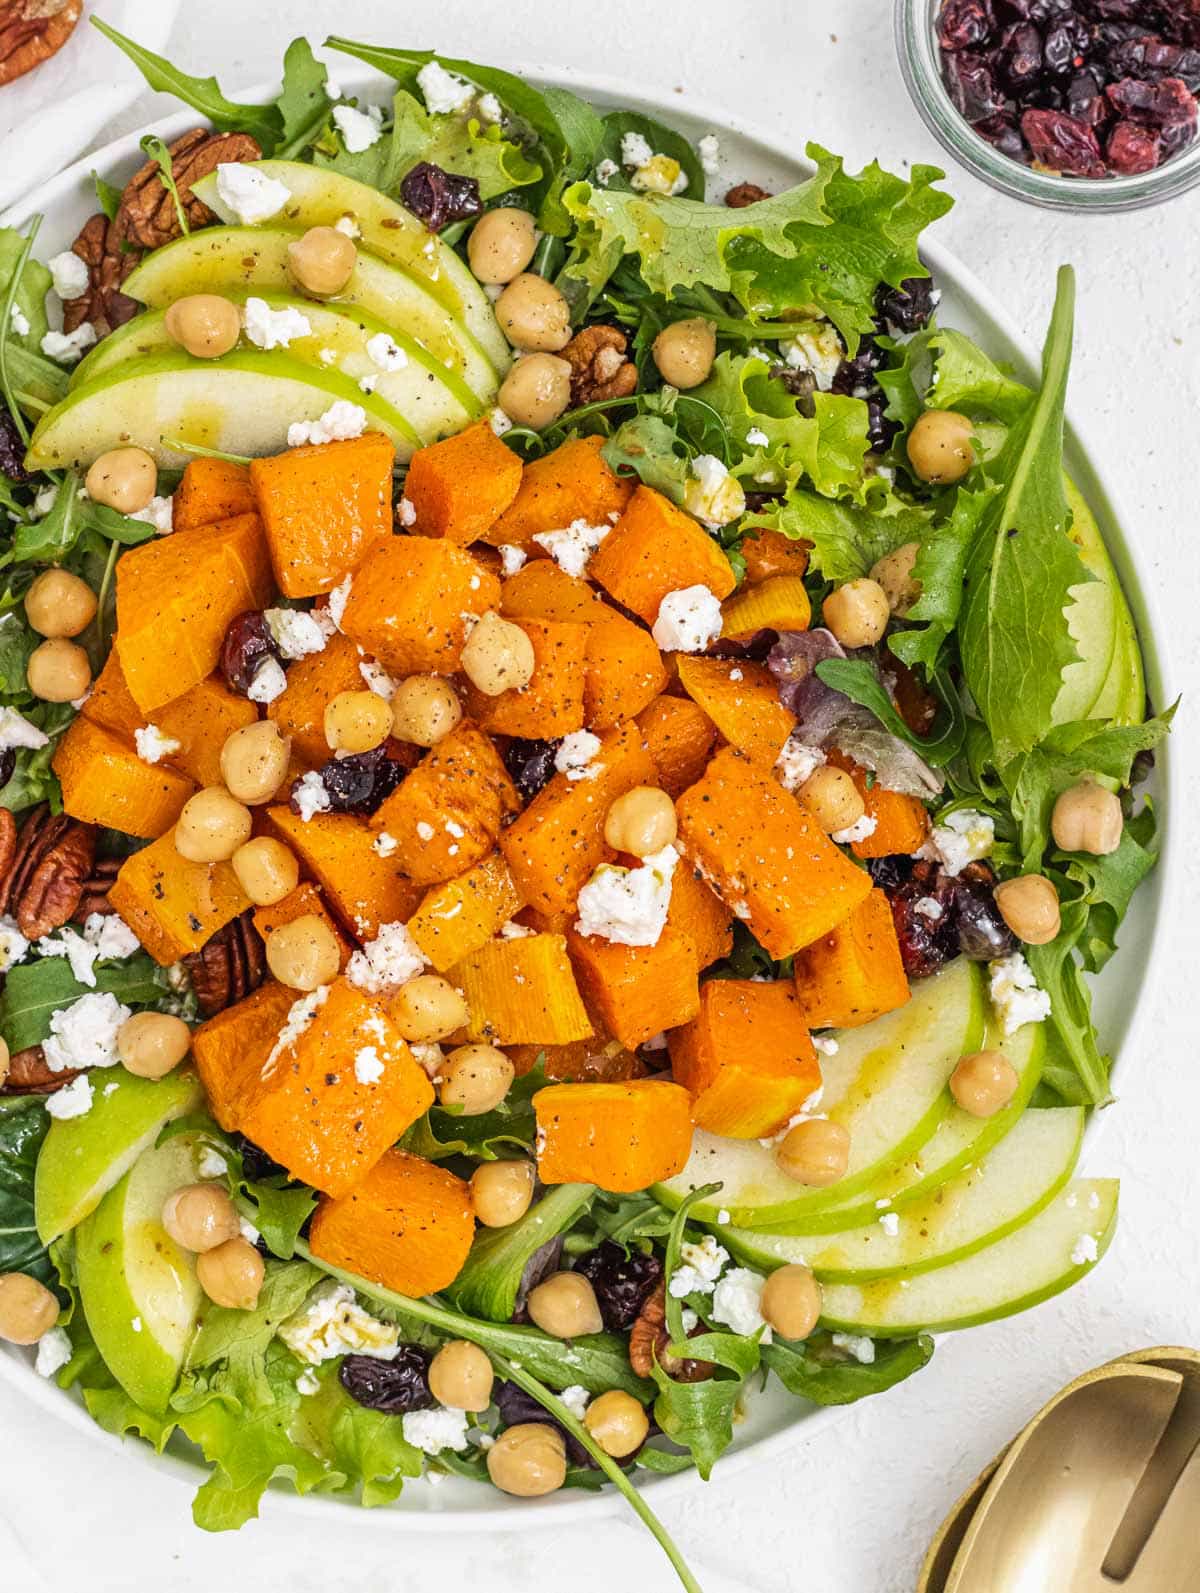 Butternut squash salad with apple and chickpeas